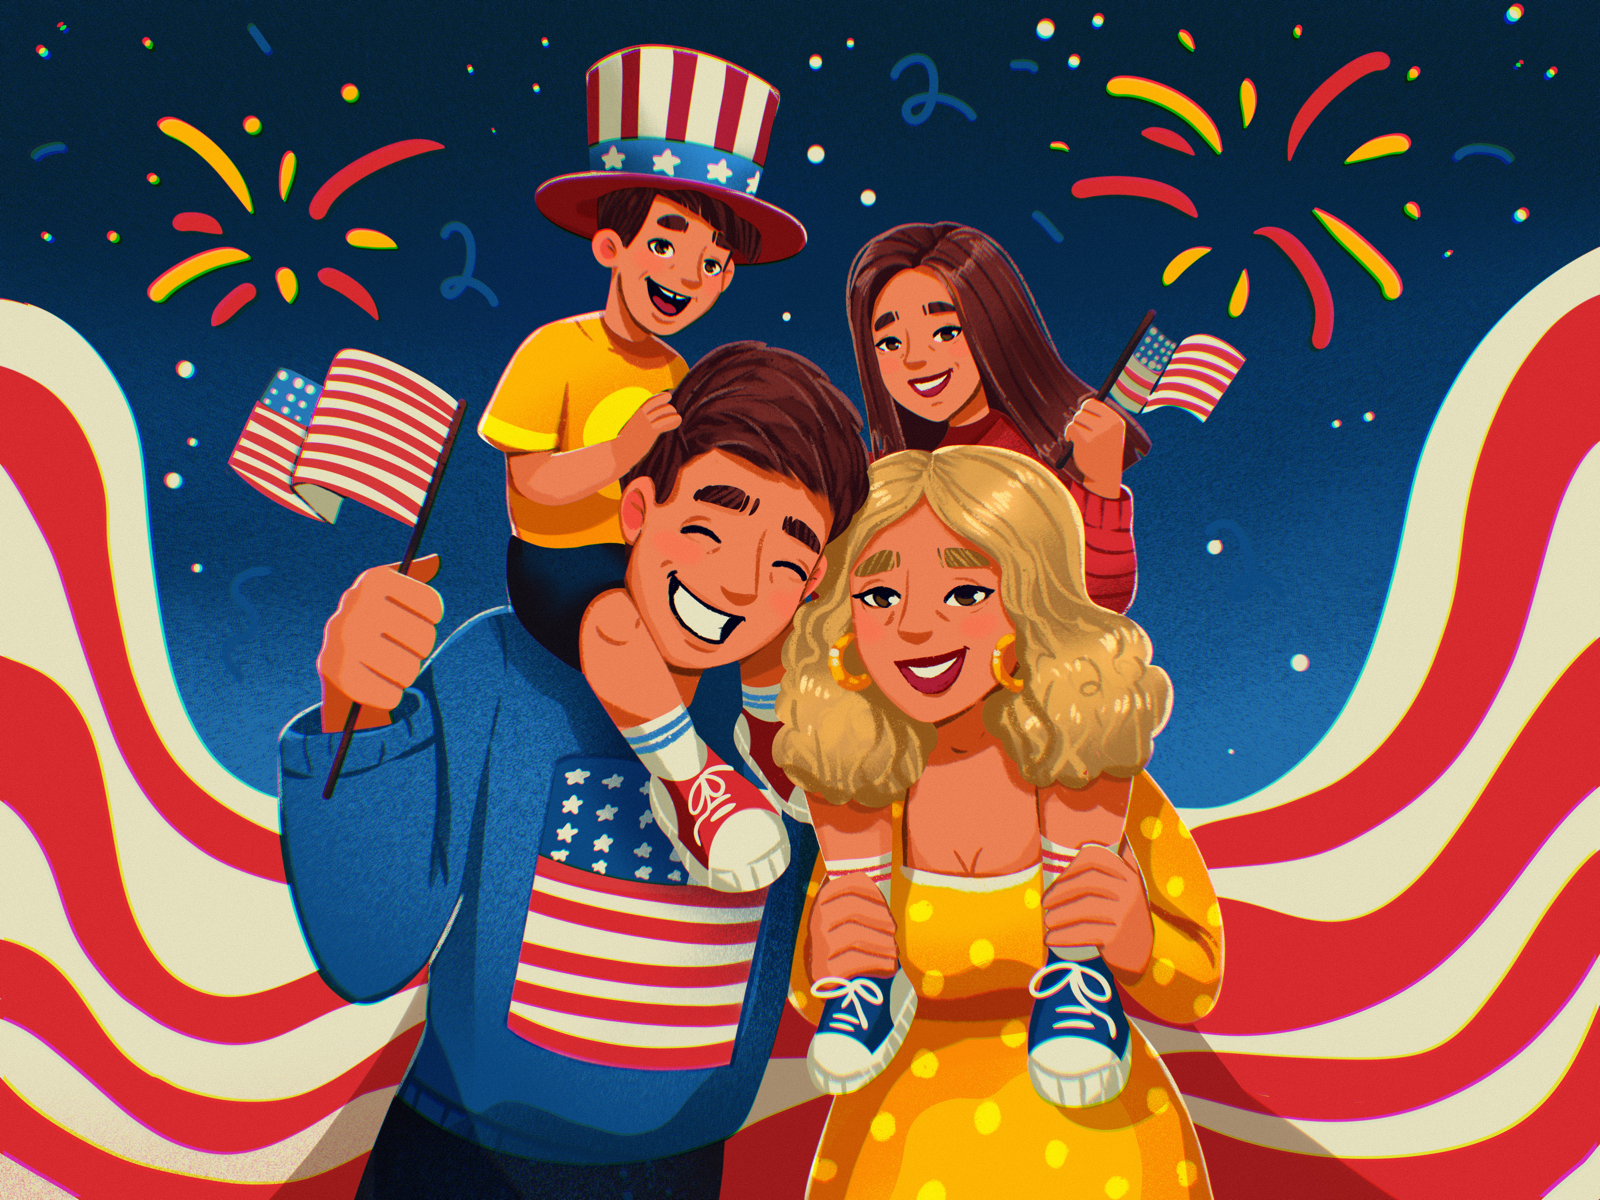 Happy Independence Day holiday children parents family july national holiday people americans usa festive celebration independence day independence digital illustration illustrator design studio illustration graphic design digital art design